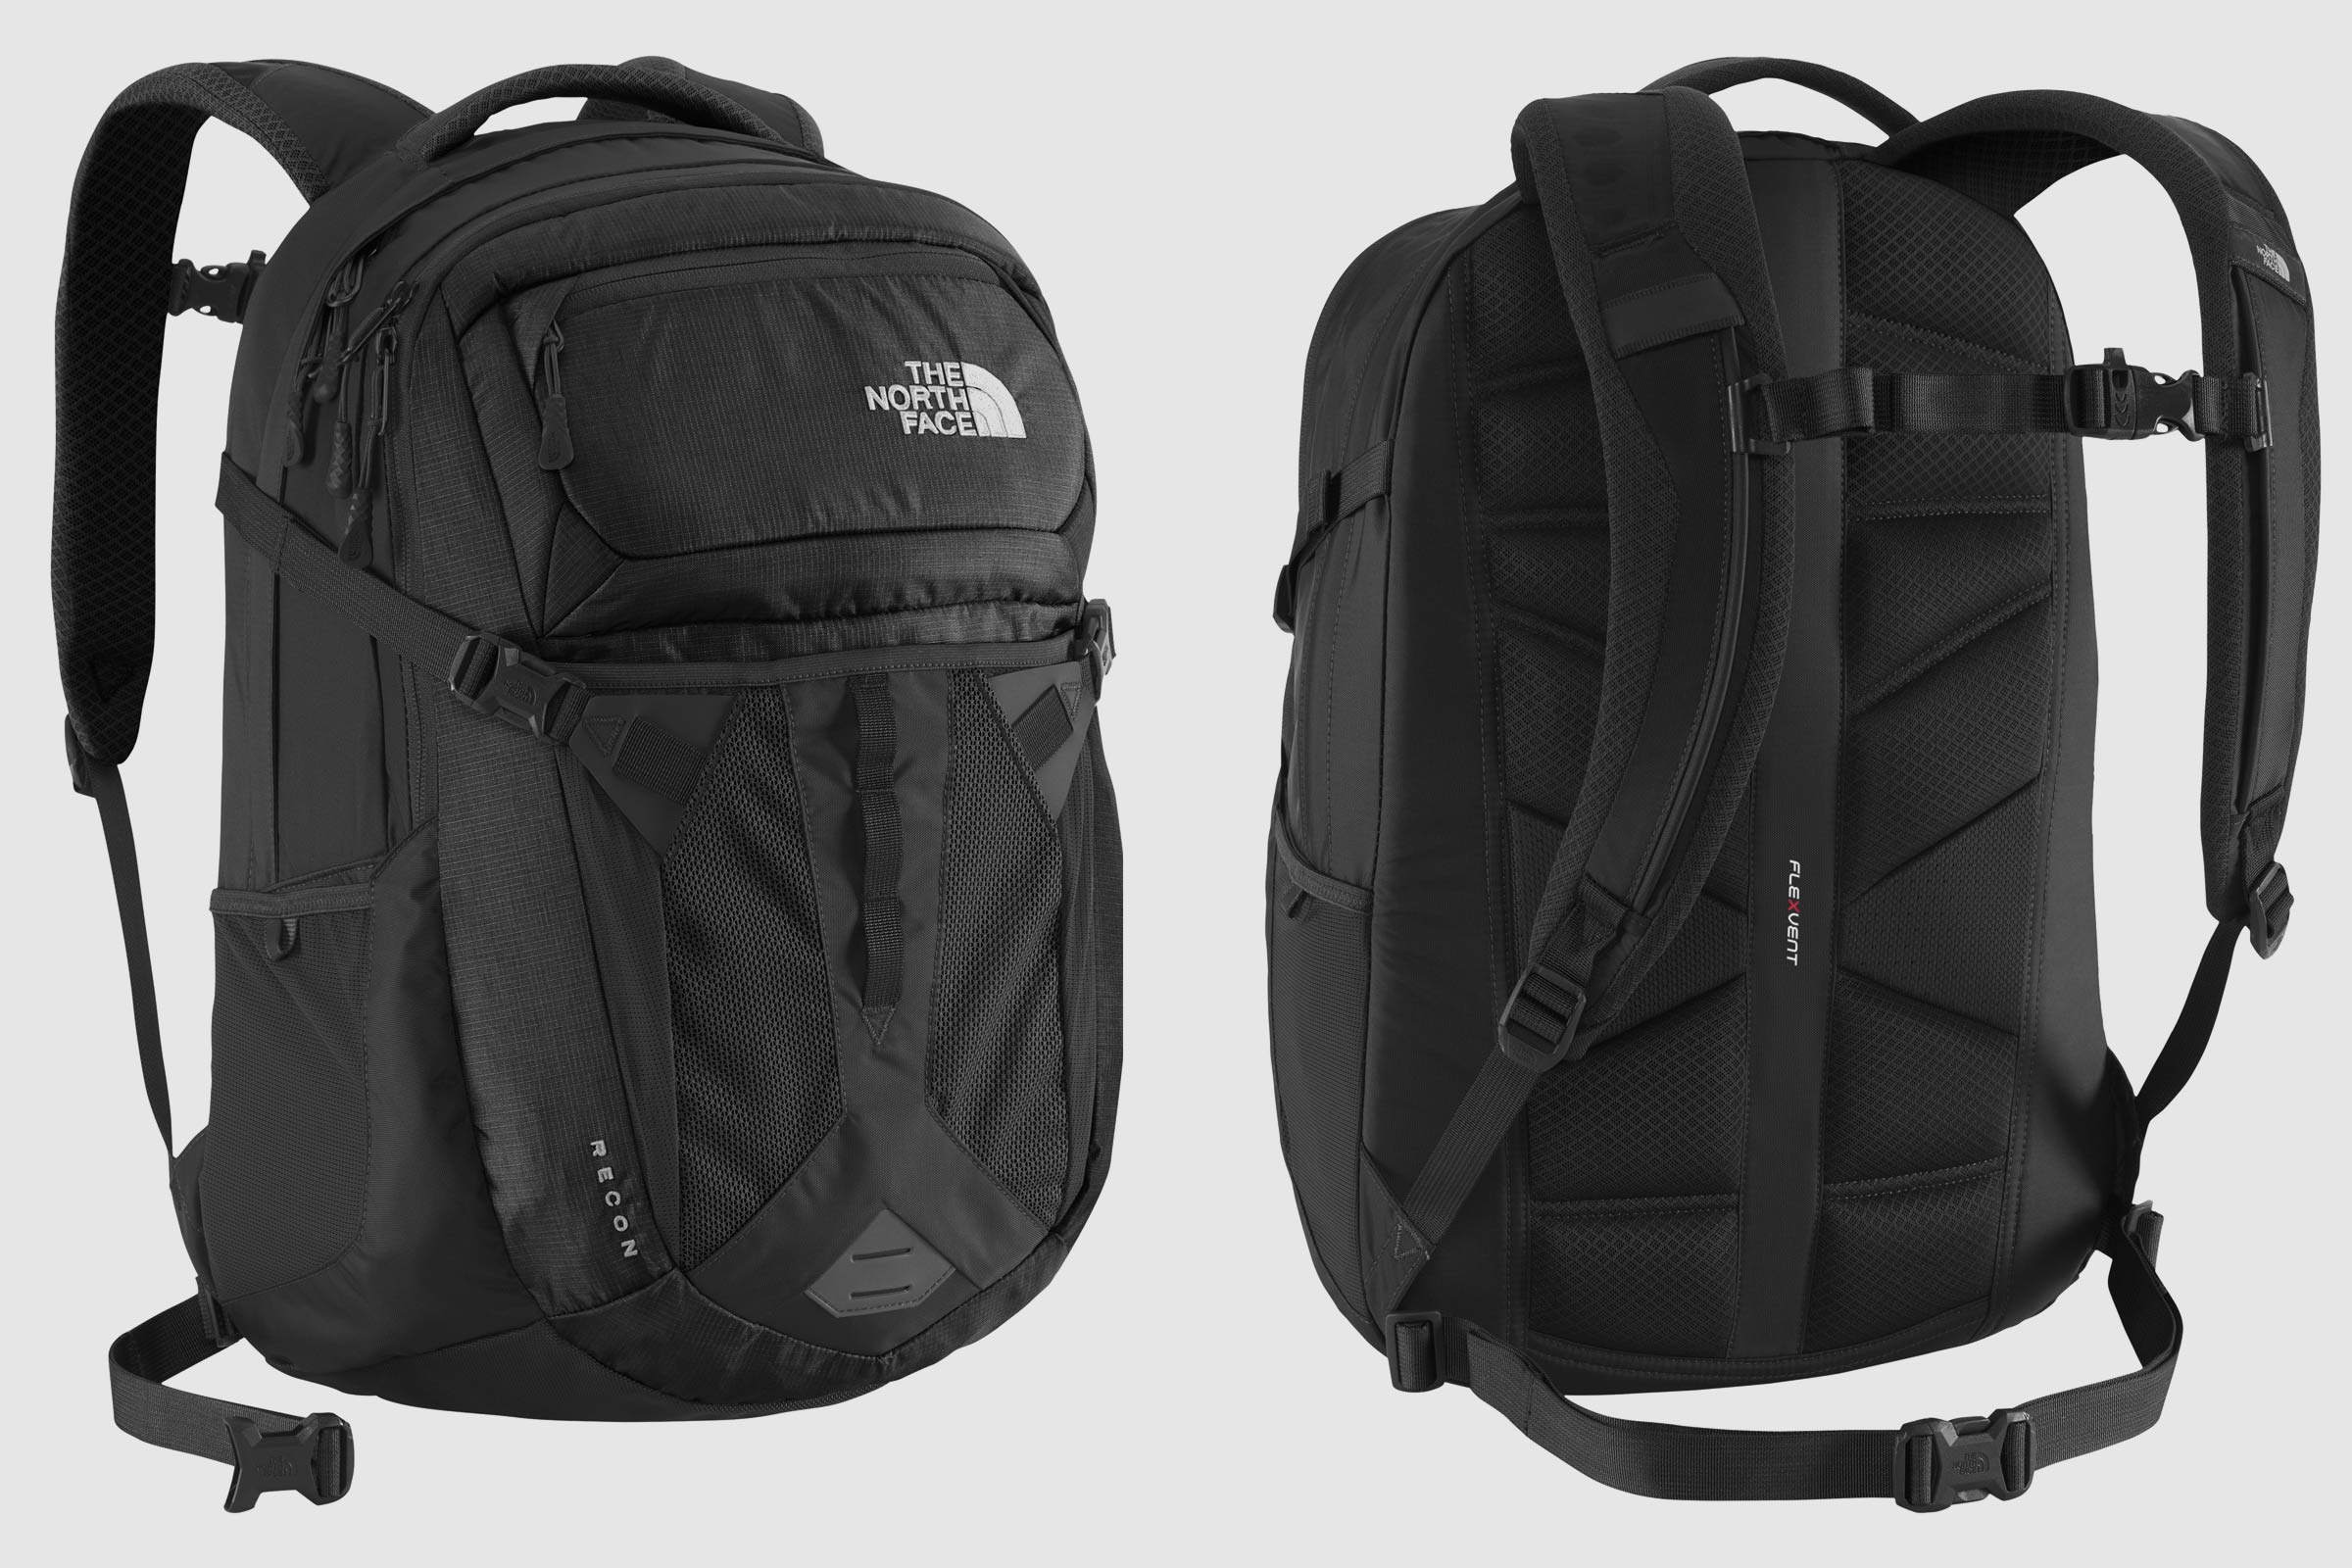 north face men's recon 18 backpack